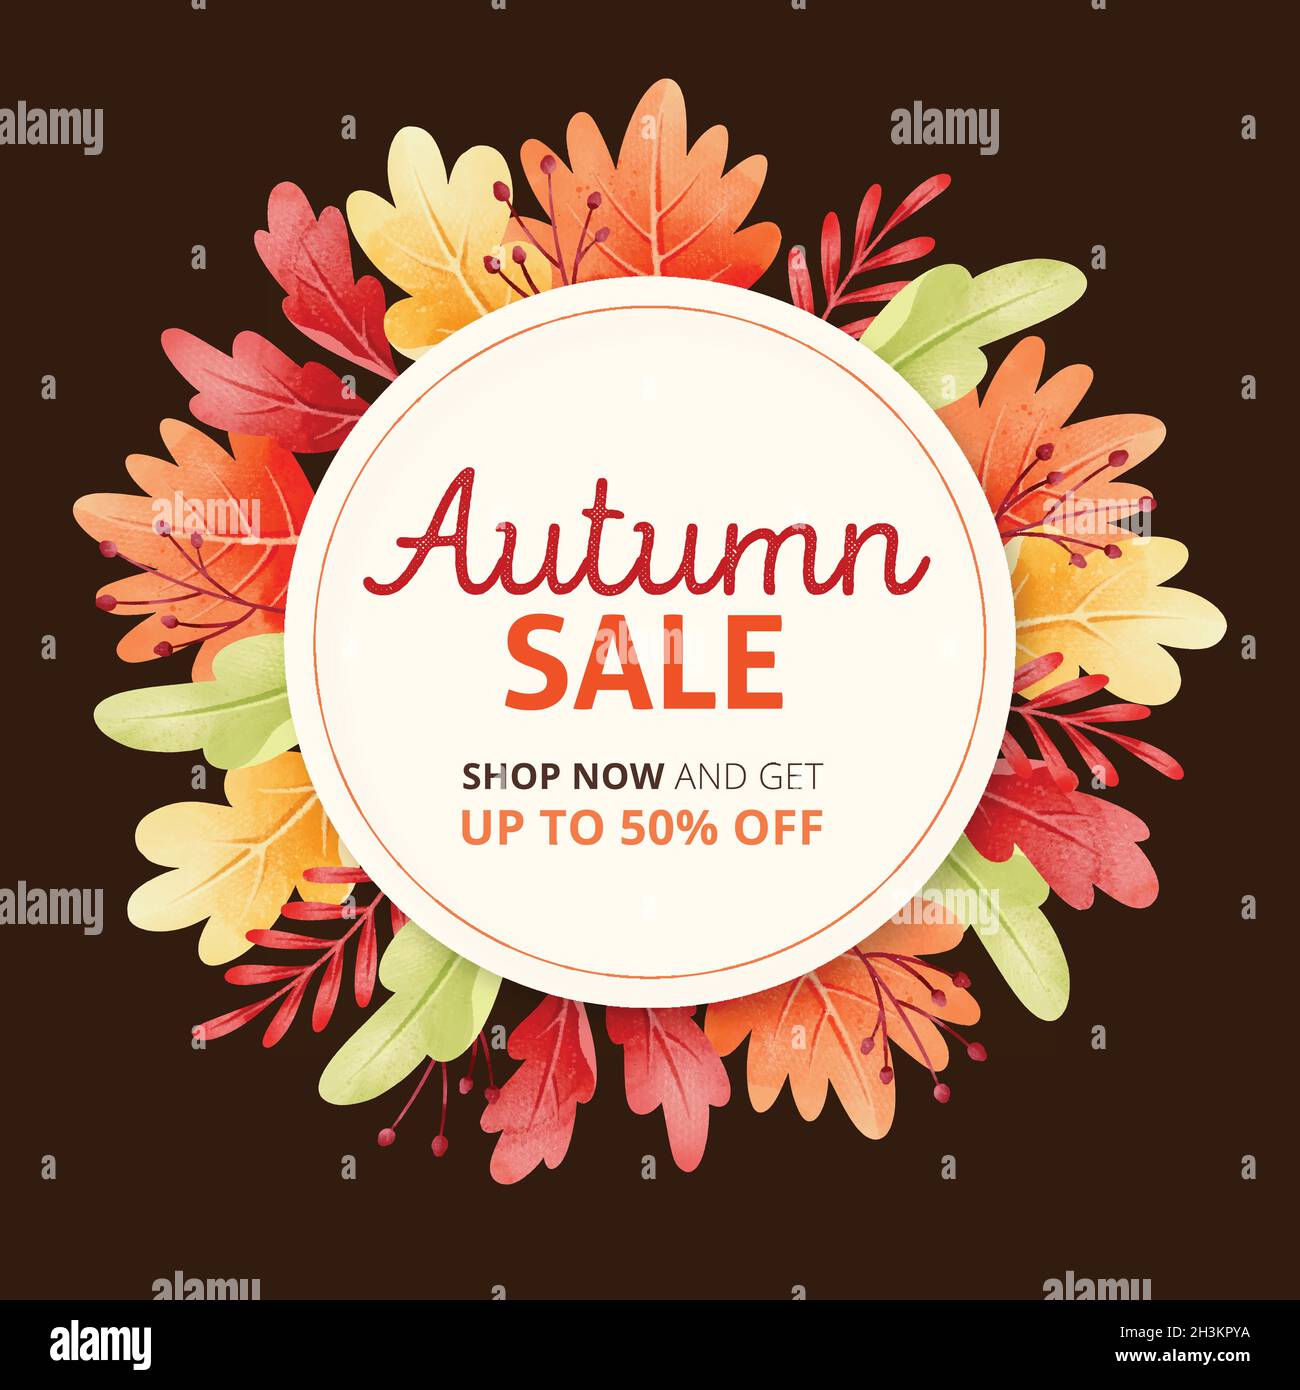 watercolour autumn sale with dried leaves vector design illustration Stock Vector